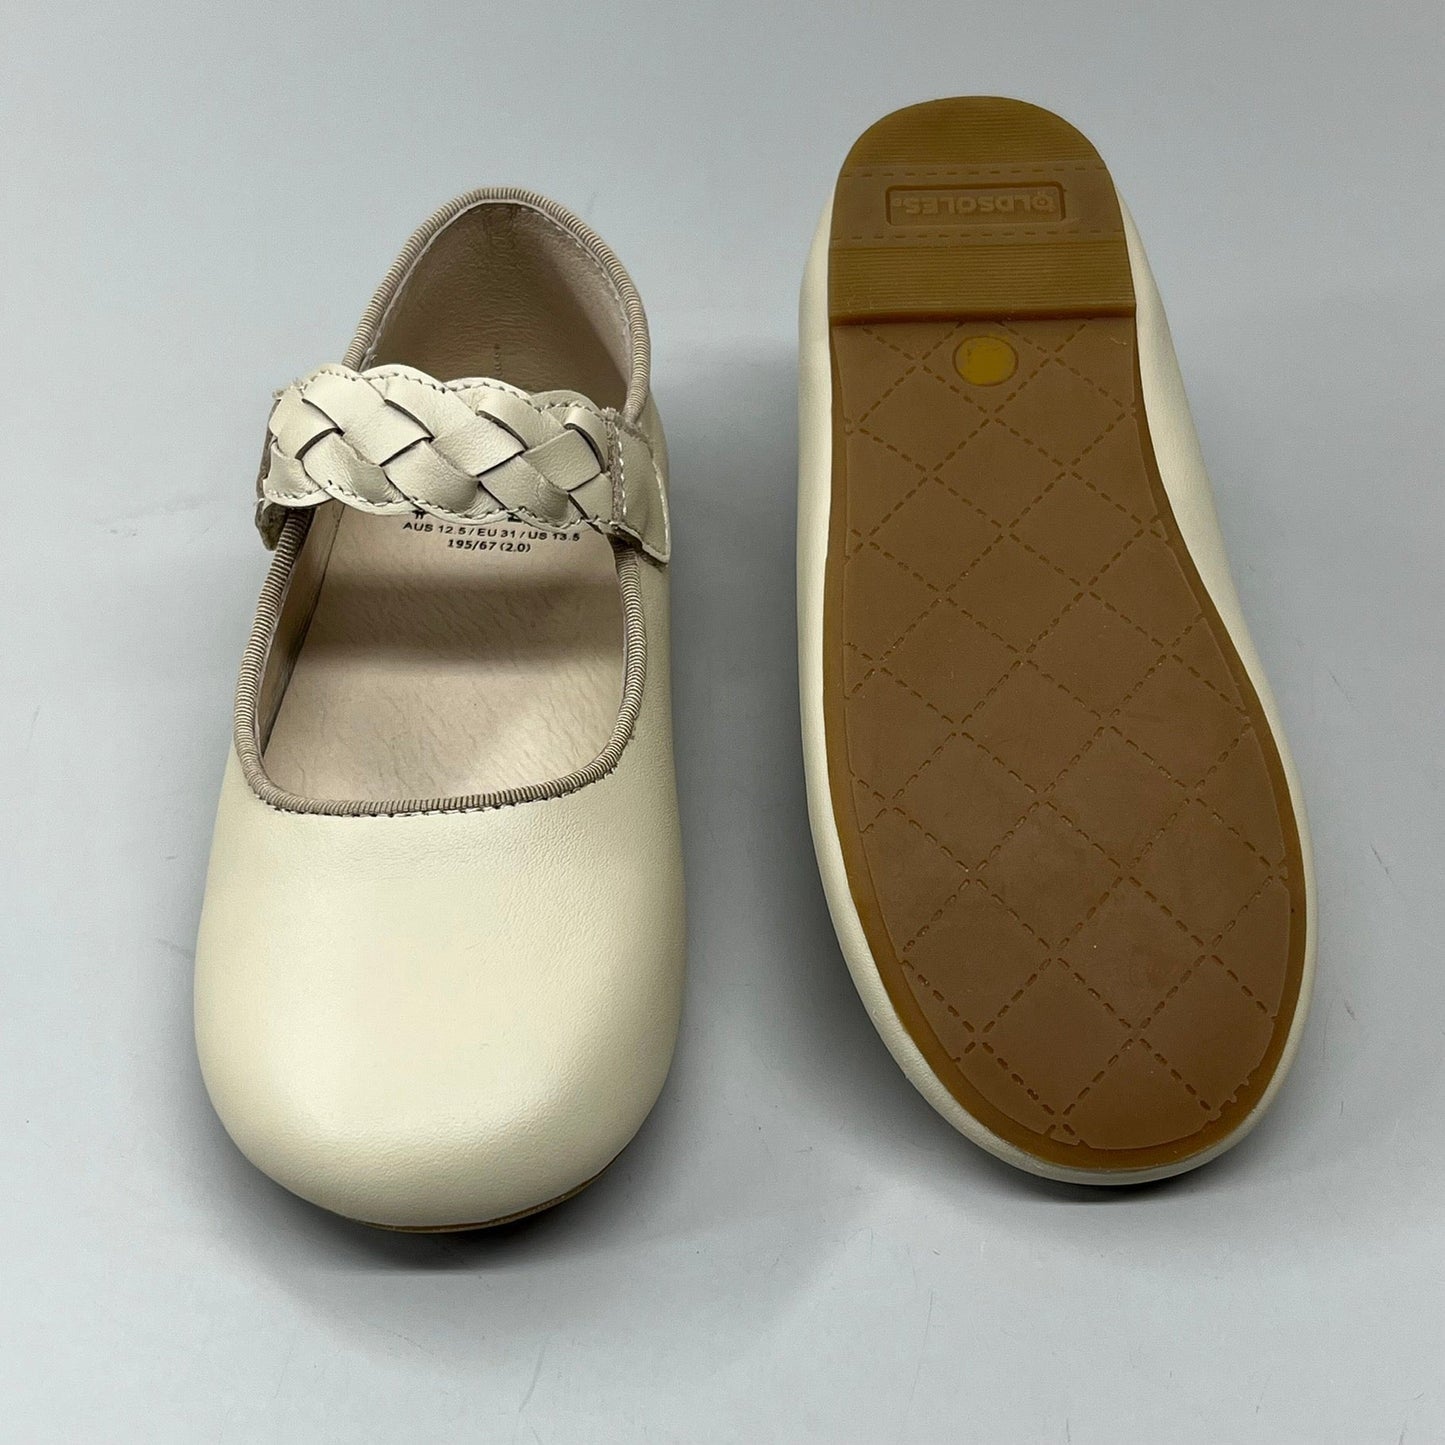 OLD SOLES Lady Plat Braided Strap Leather Shoe Kid’s Sz 25 US 9 Cream #817